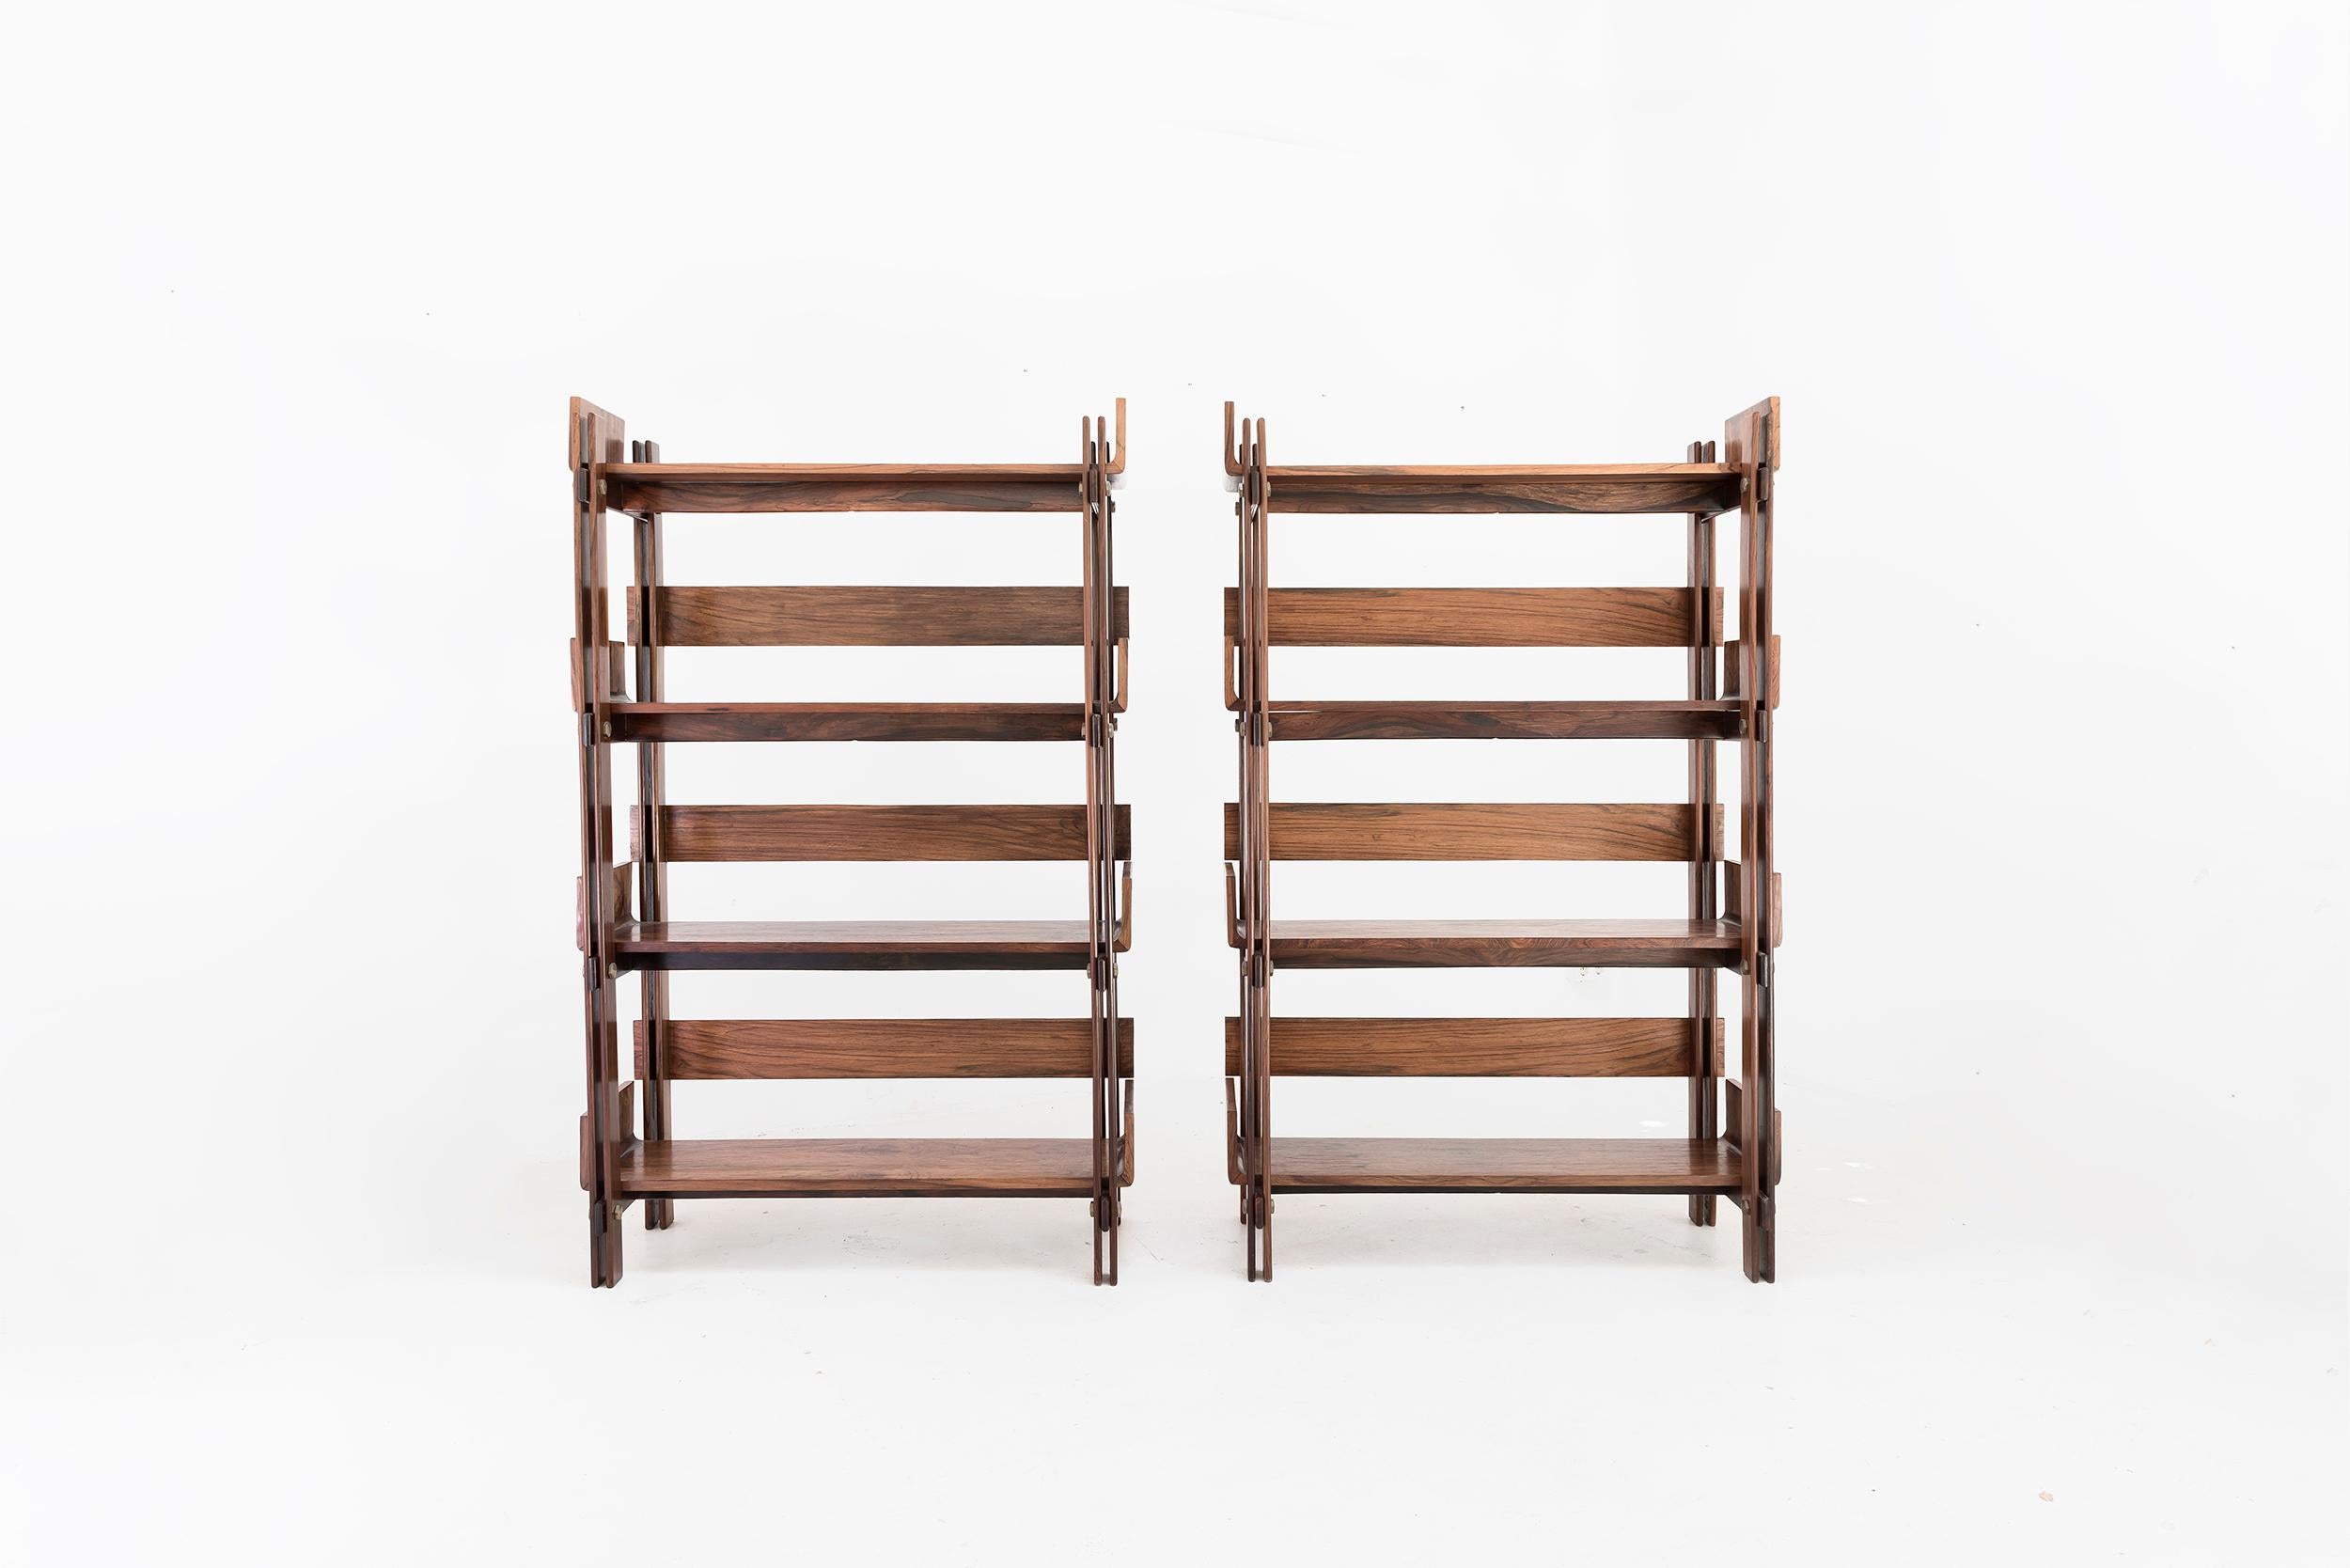 Sergio Rodrigues
Pair of bookcases
Manufactured by Oca
Brasil, 1960
Jacaranda wood, brass trim
From the archives of Side Gallery, Barcelona 

Measurements
102 cm x 22,22 cm x 160 H cm (each)
40.25 in x 8.75 in, 63 H in